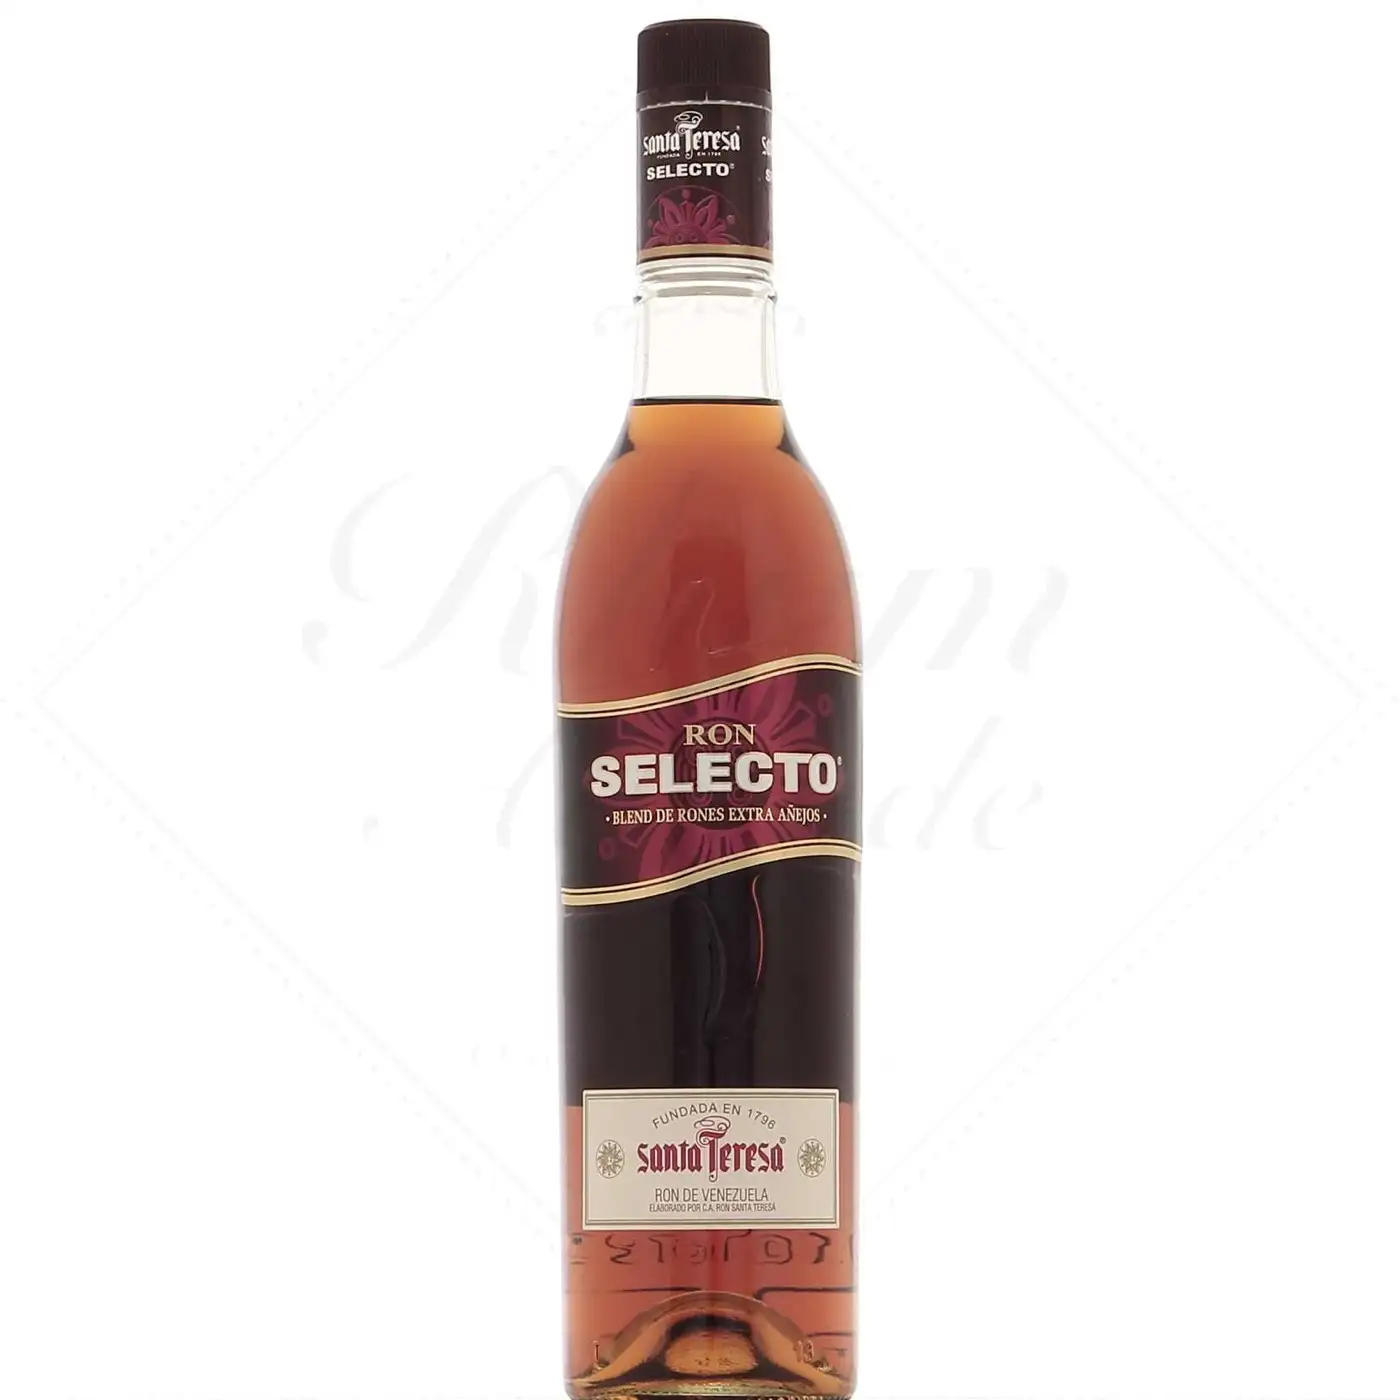 Image of the front of the bottle of the rum Selecto